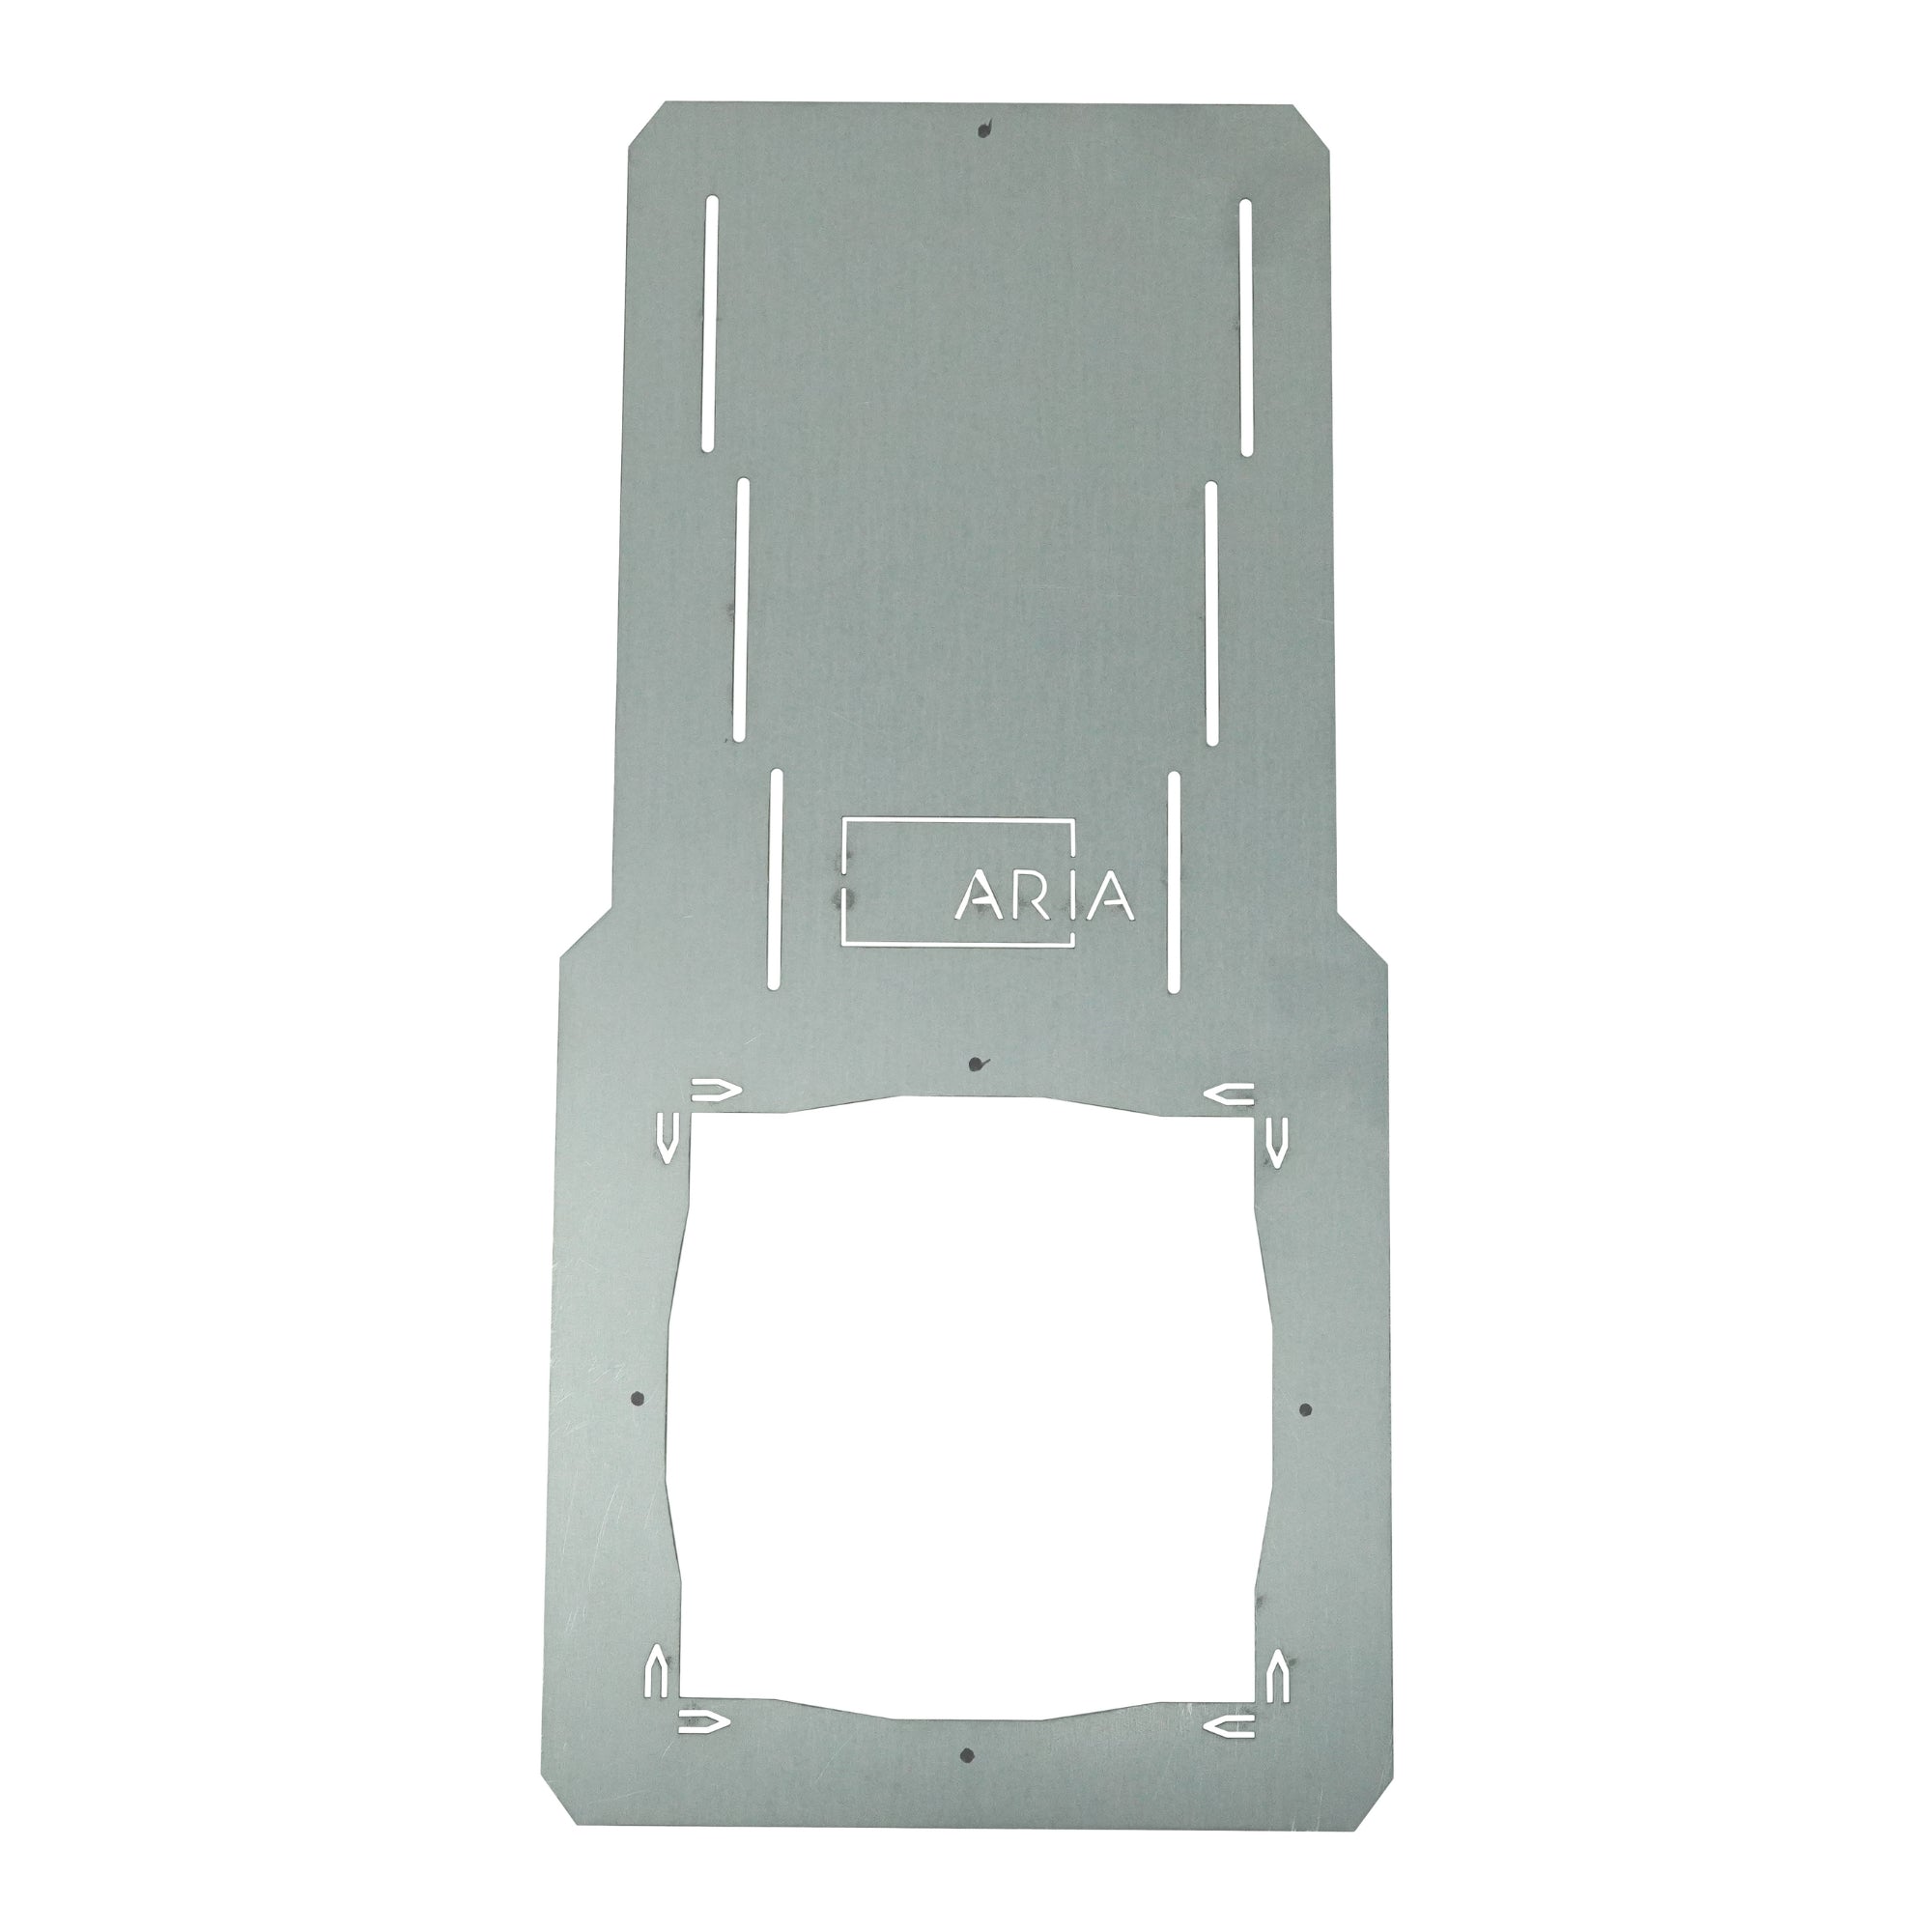 Fittes Device Mount Smash Plate